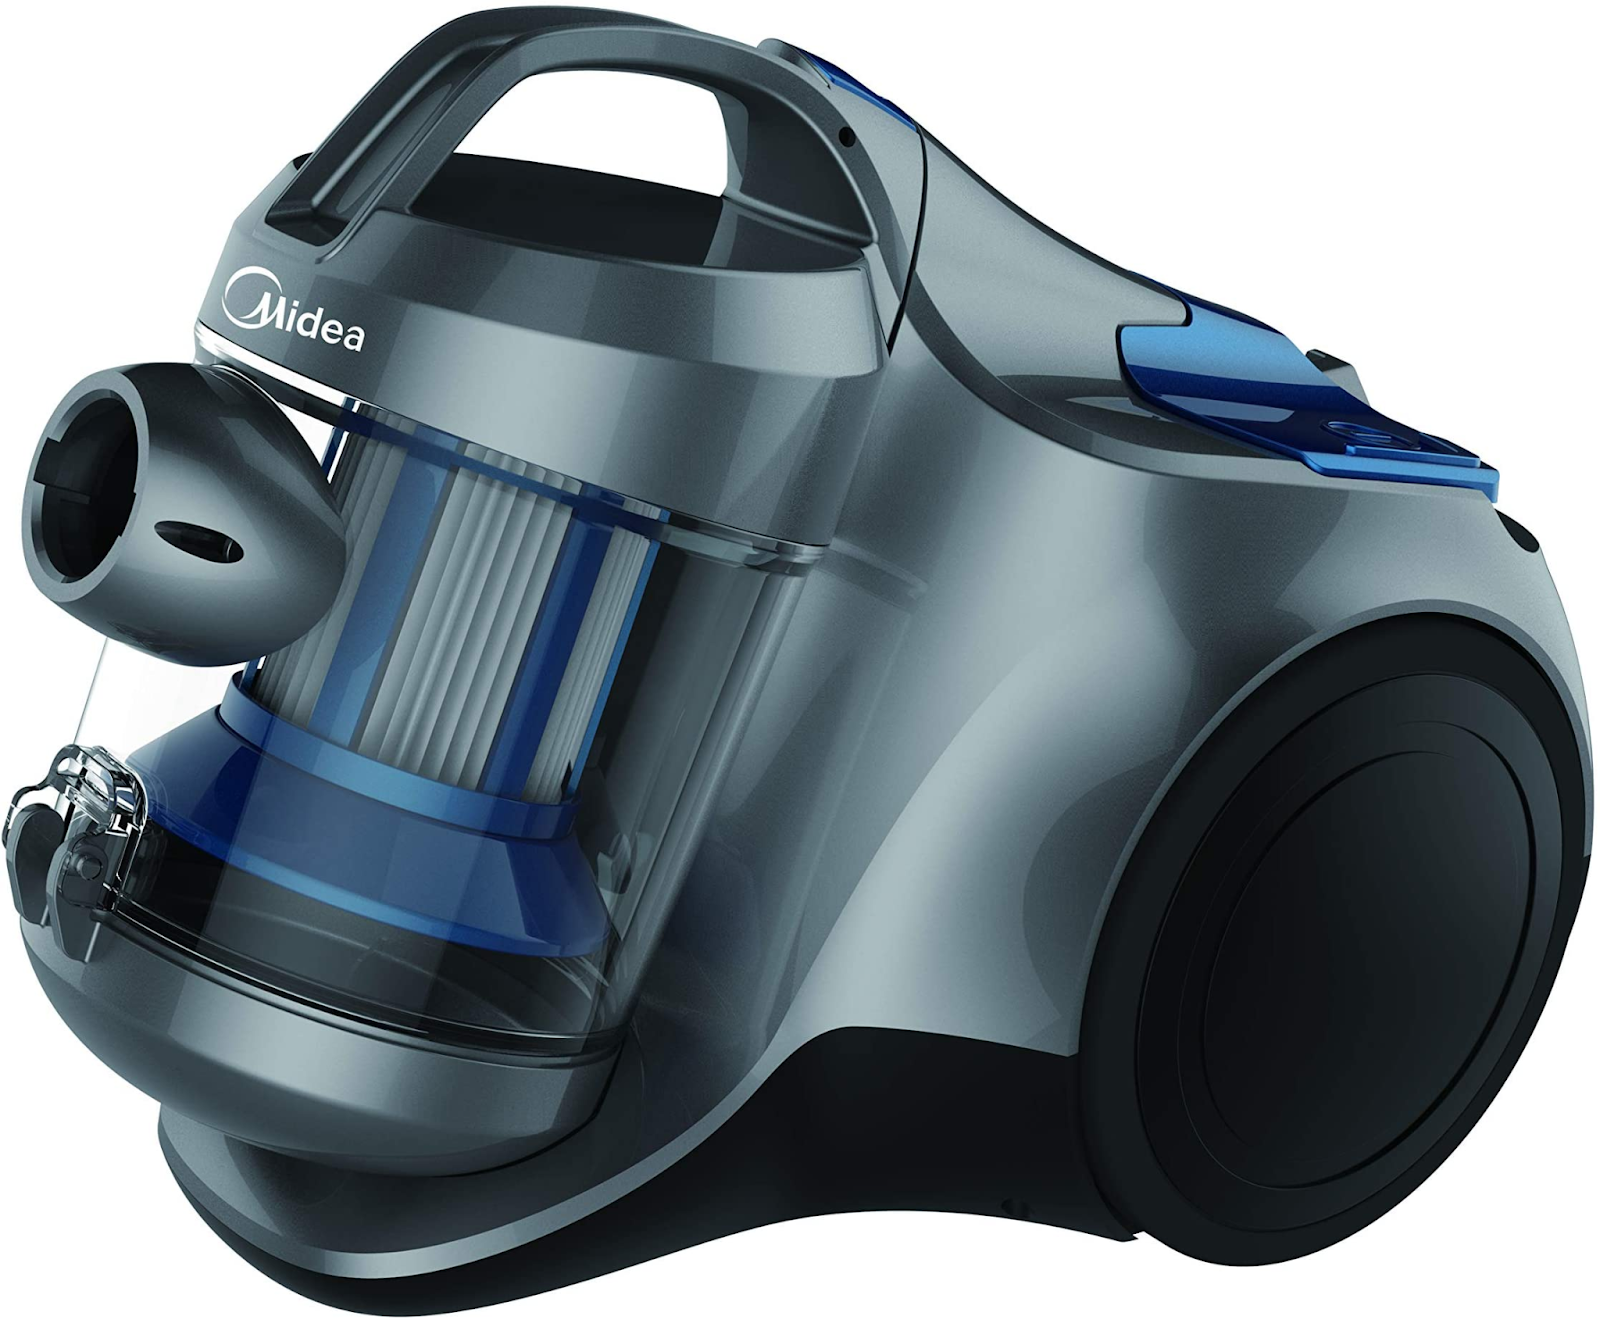 The capacity of your vaccum cleaner depends on the size of the cup or dust bag.